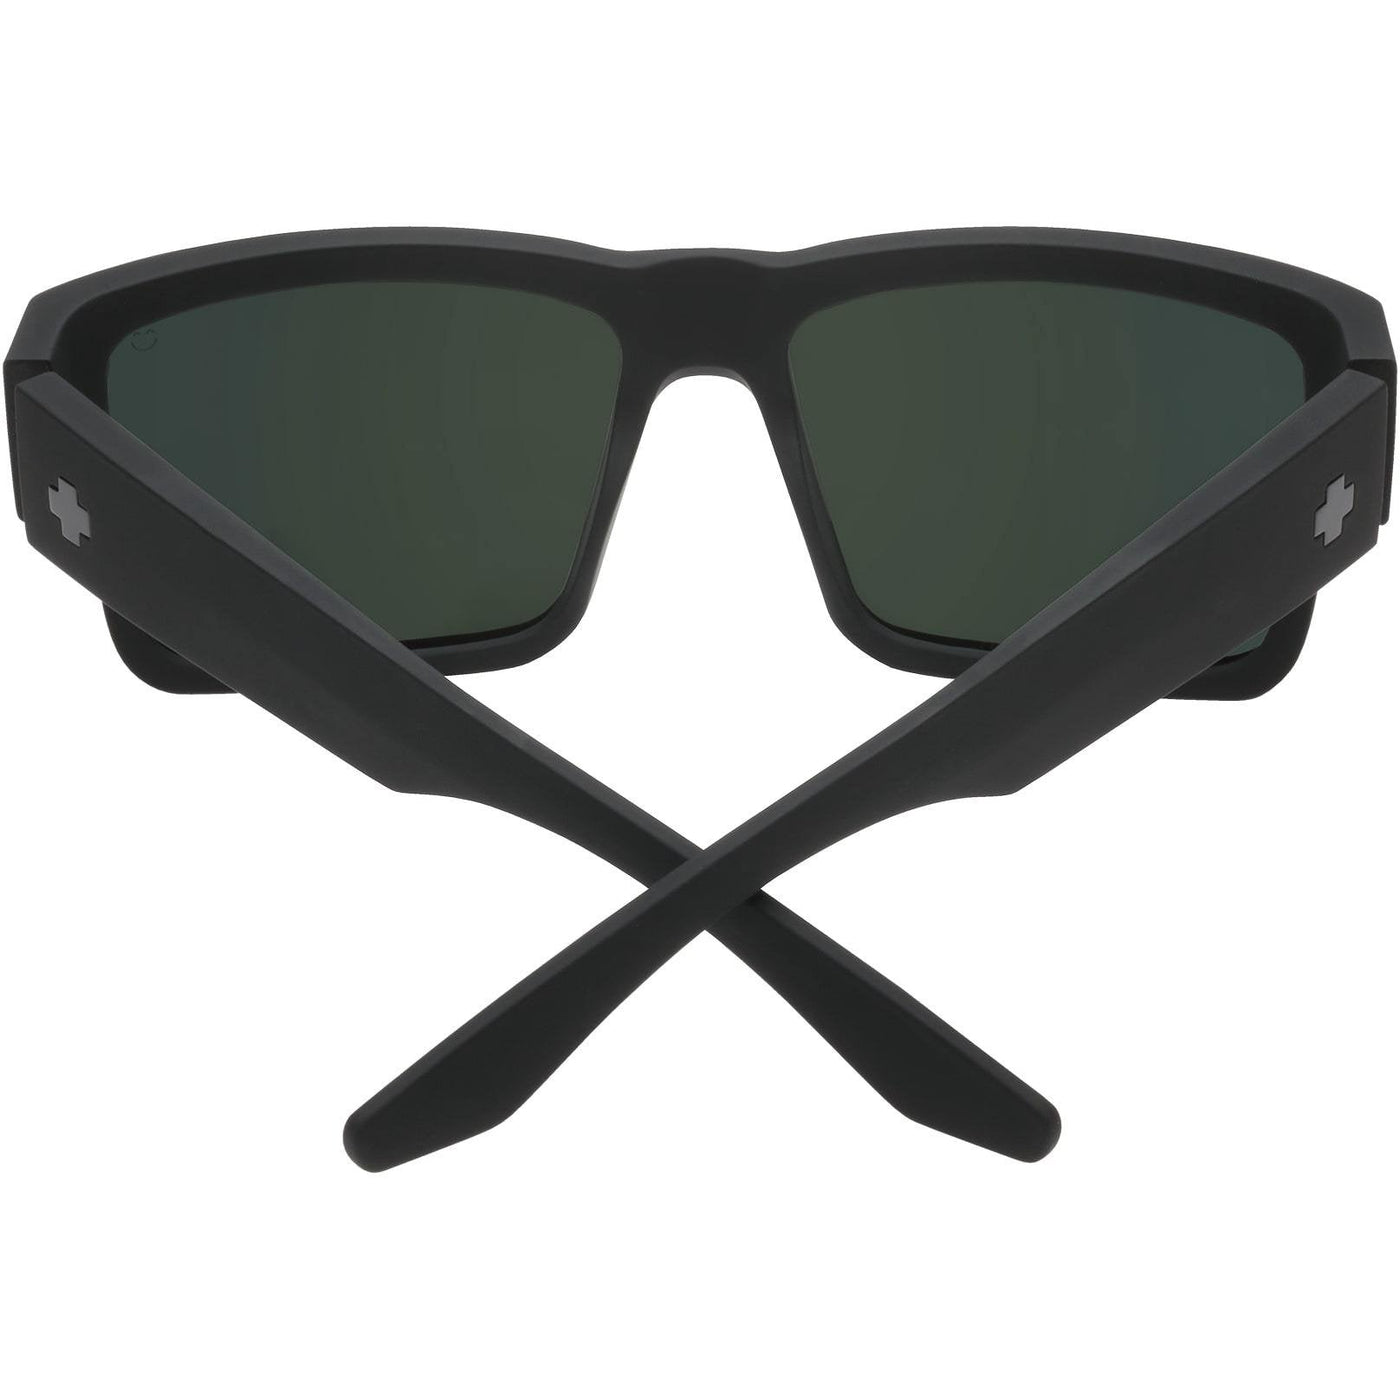 bold sunglasses for adults